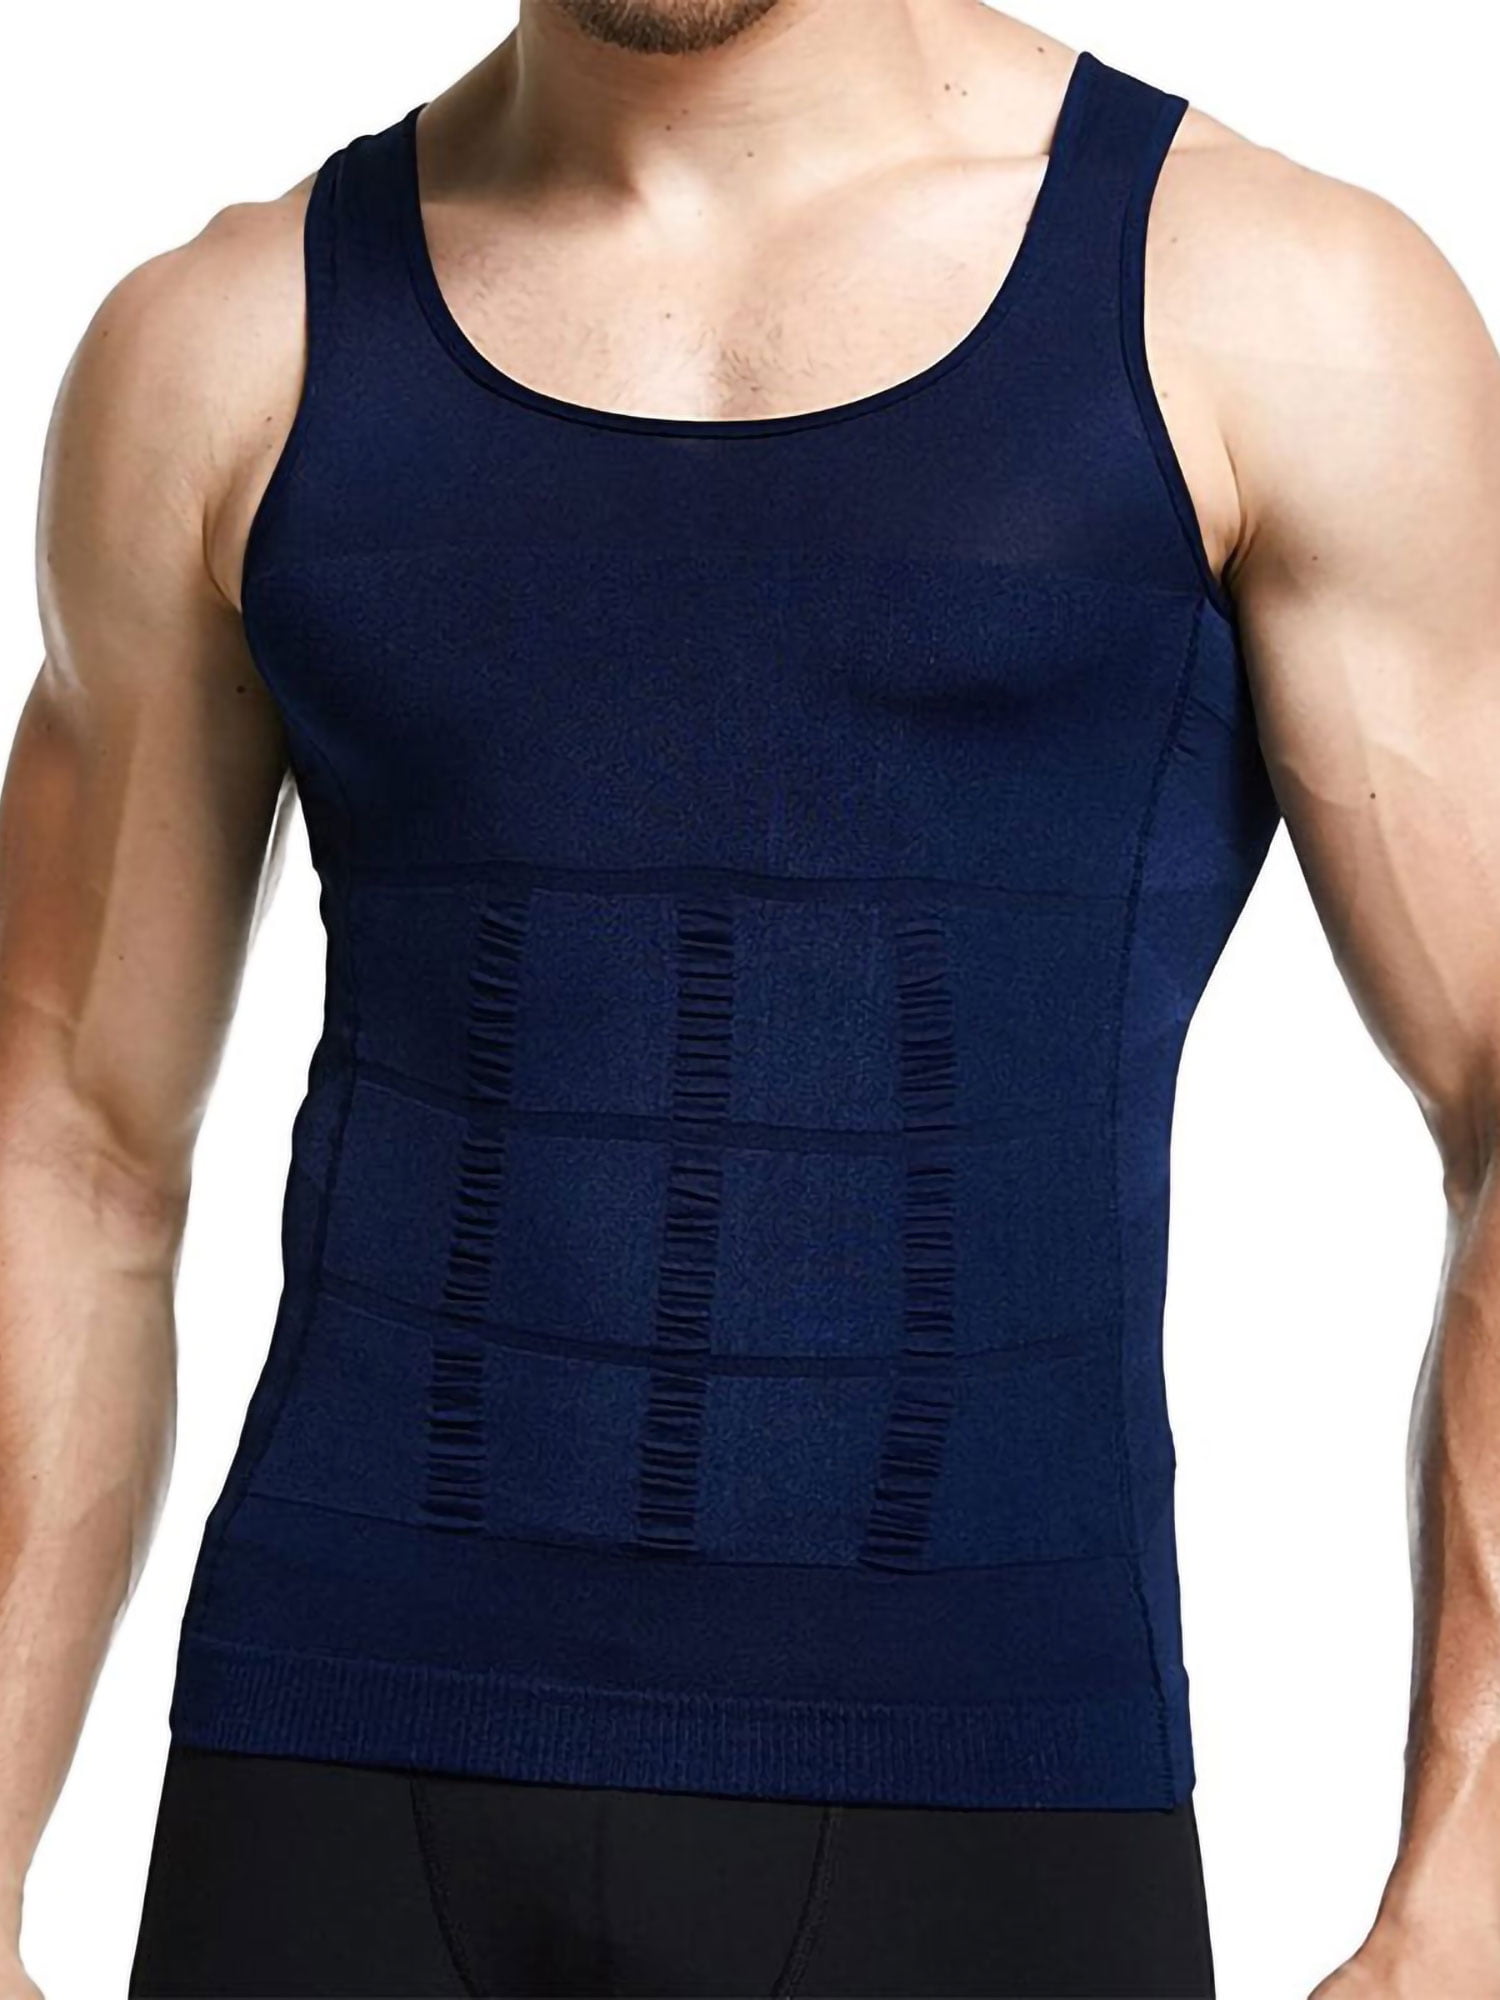 Mens Tank Tops and Body Shaper Slimming Vest Compression Sleeveless Muscle Gym Workout Tshirt for Men Running Slim Fit Tank Tops Stretch Short Sleeve Sportwears